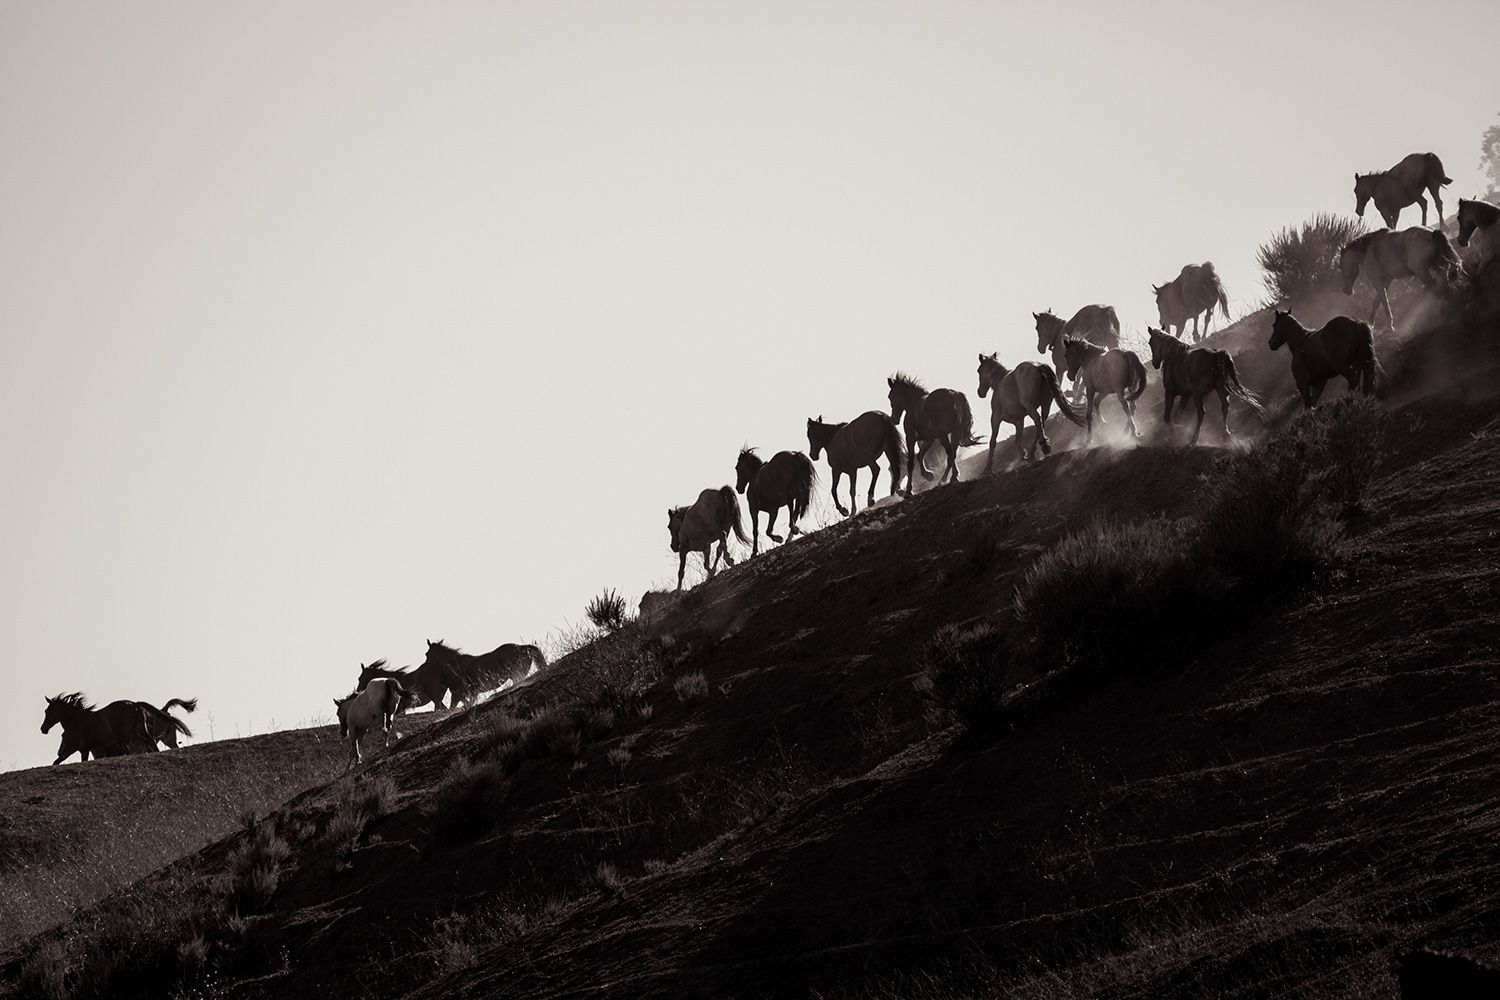 The Silhouettes of Wild Horses Running Over a Ridge